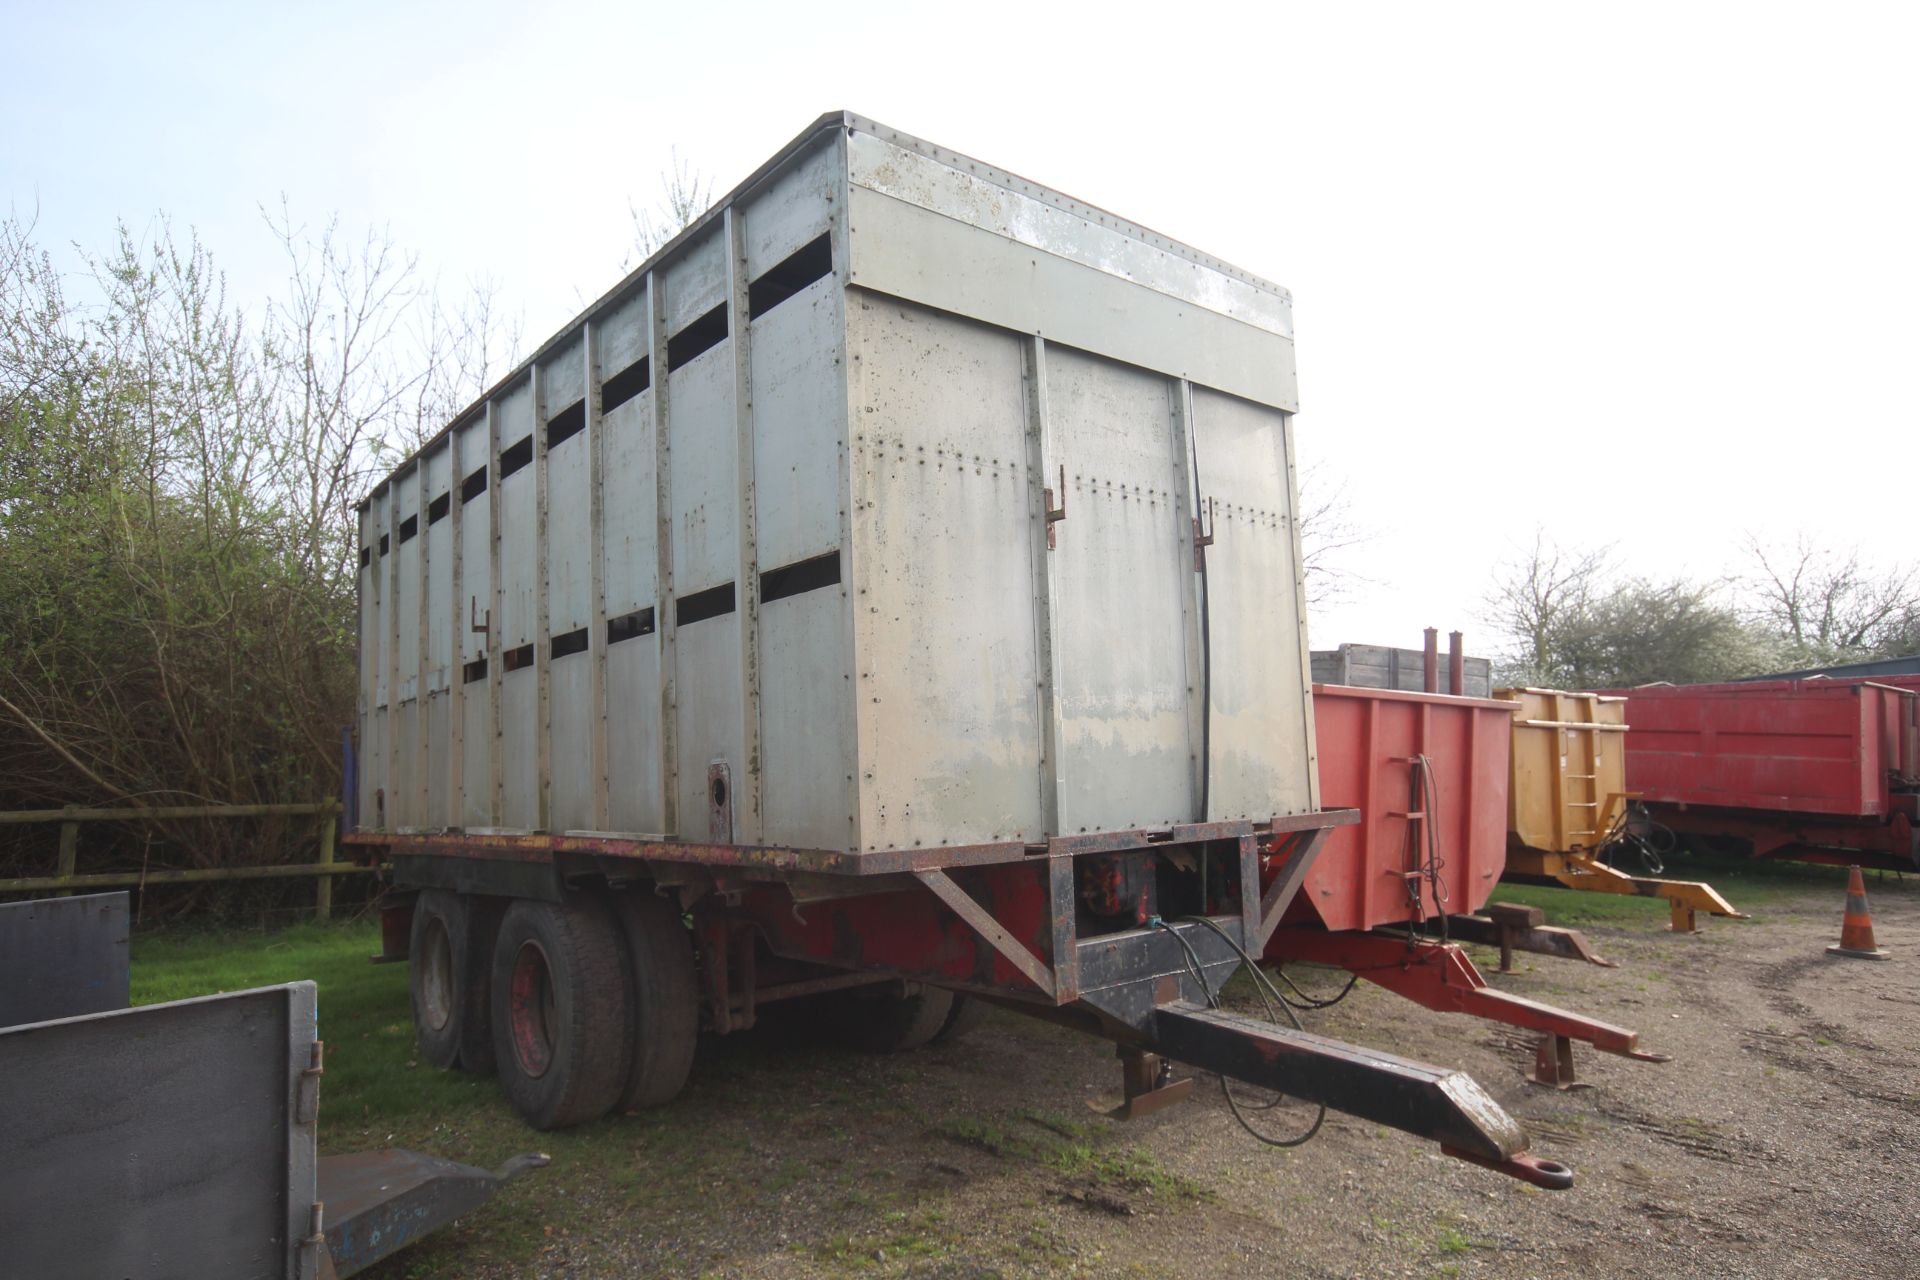 19ft 6in twin axle tractor drawn livestock trailer. Ex-lorry drag. With steel suspension and twin - Image 2 of 34